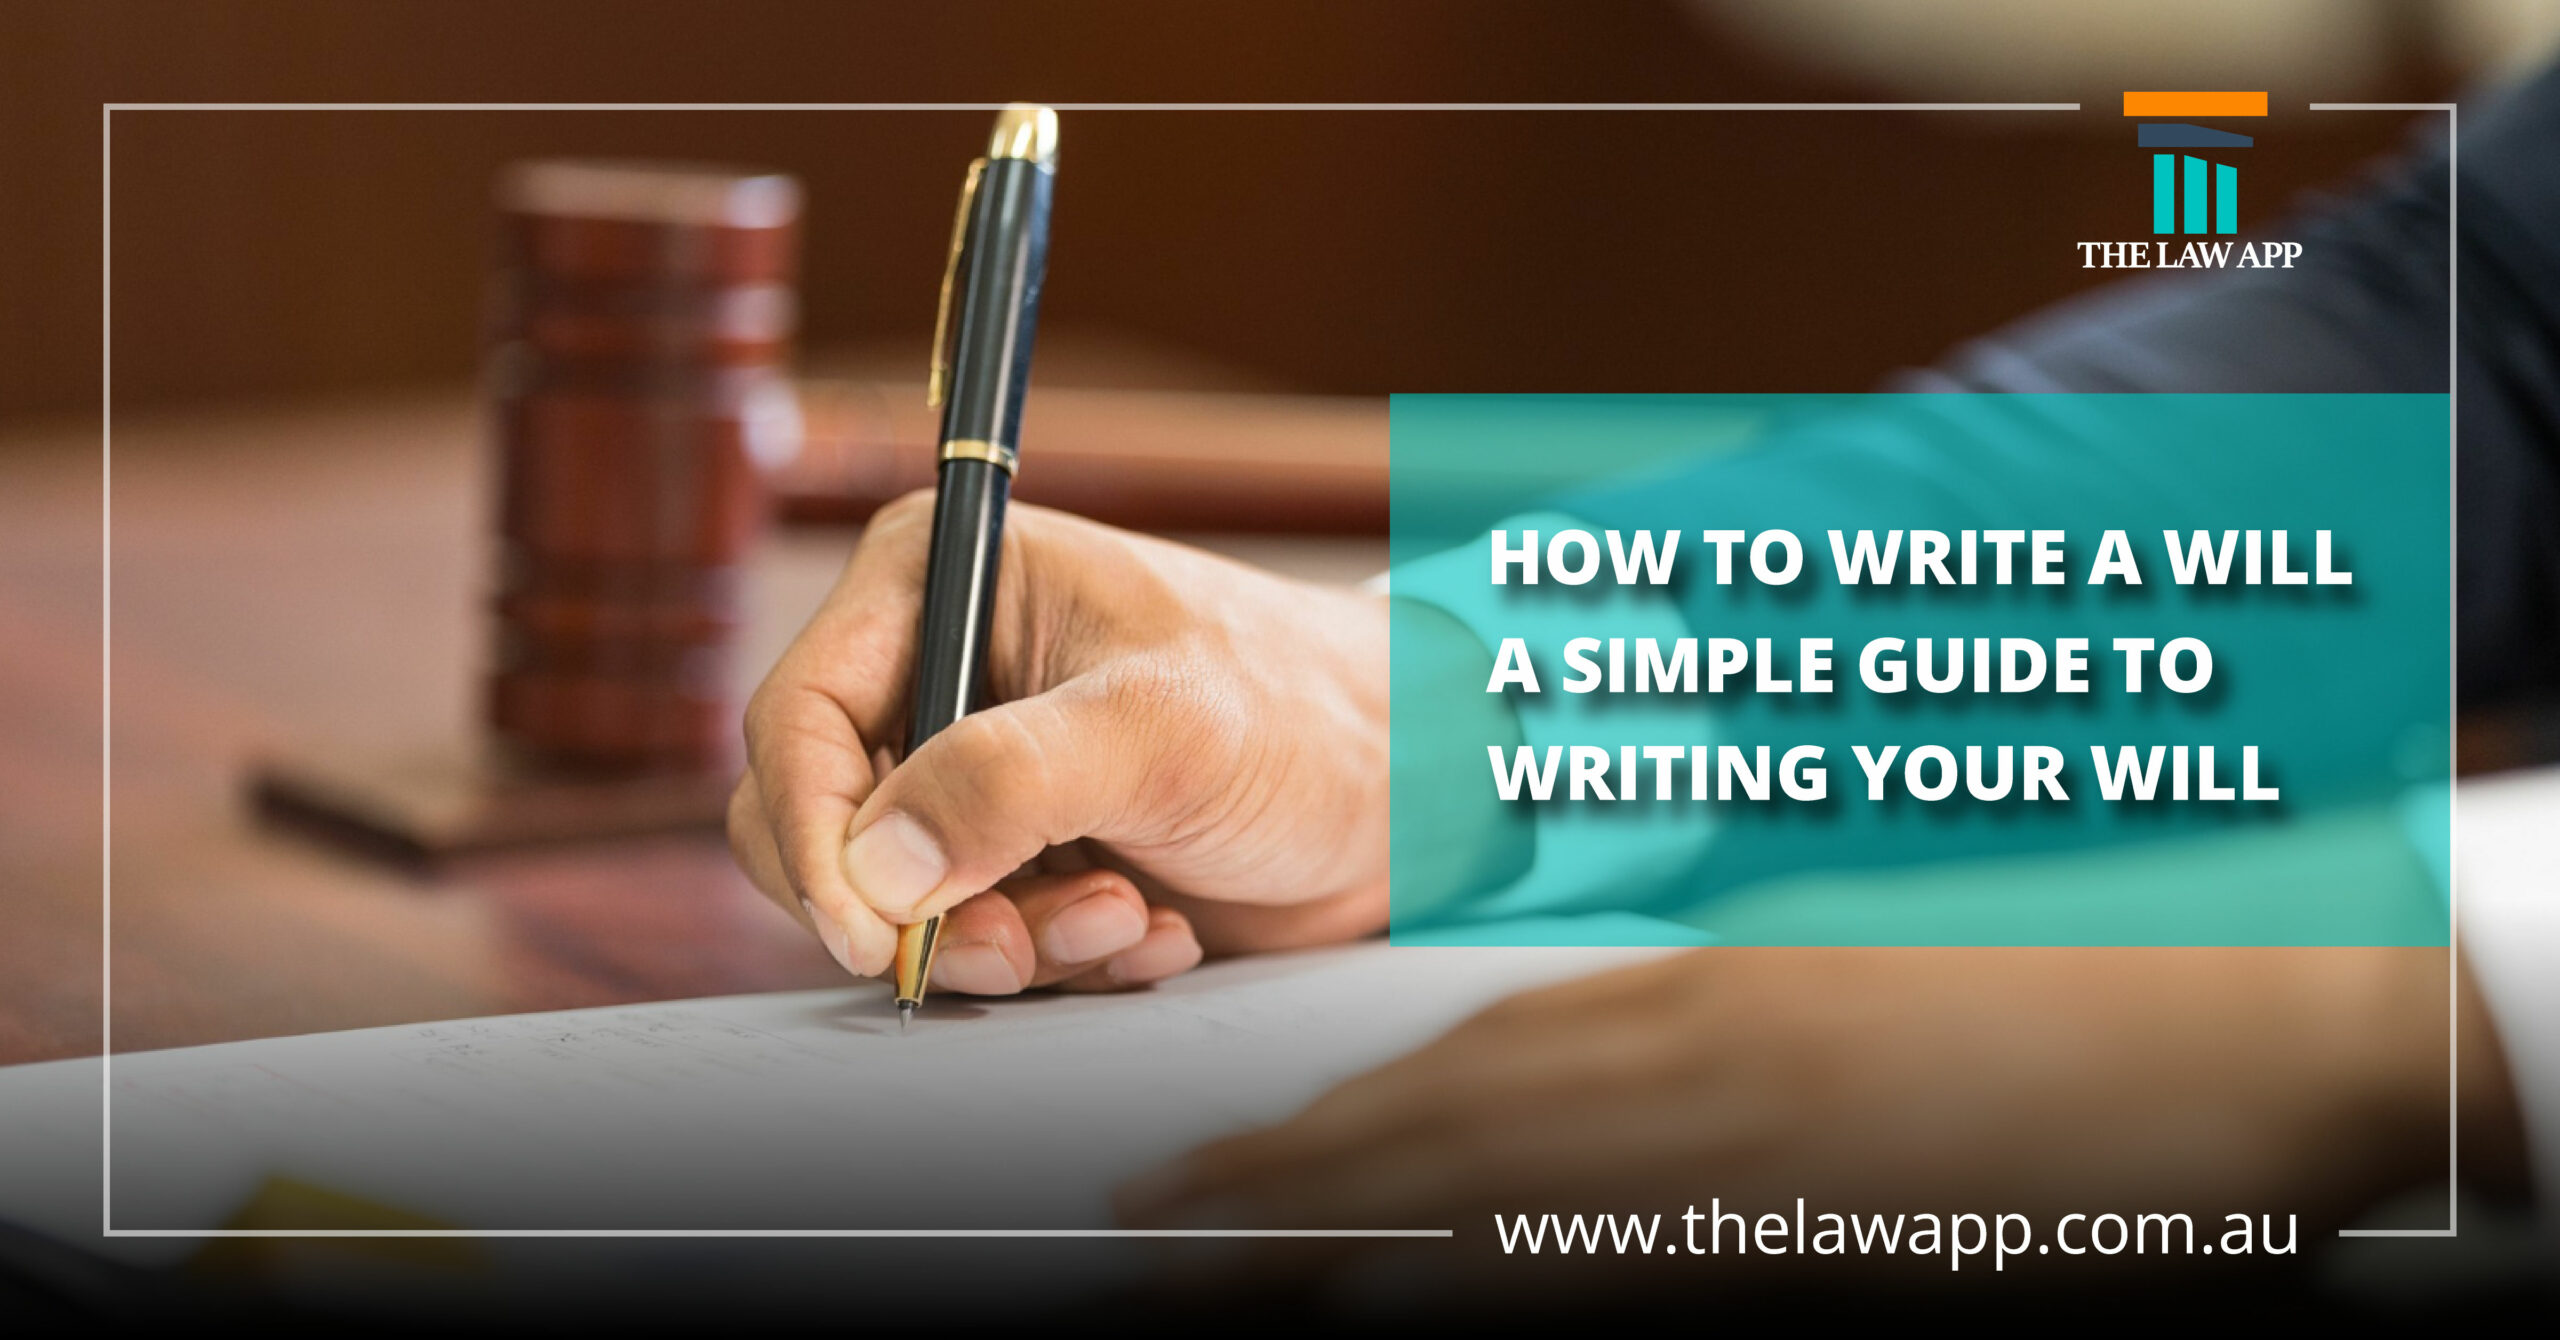 How to Write a Will: A Simple Guide to Writing a Will